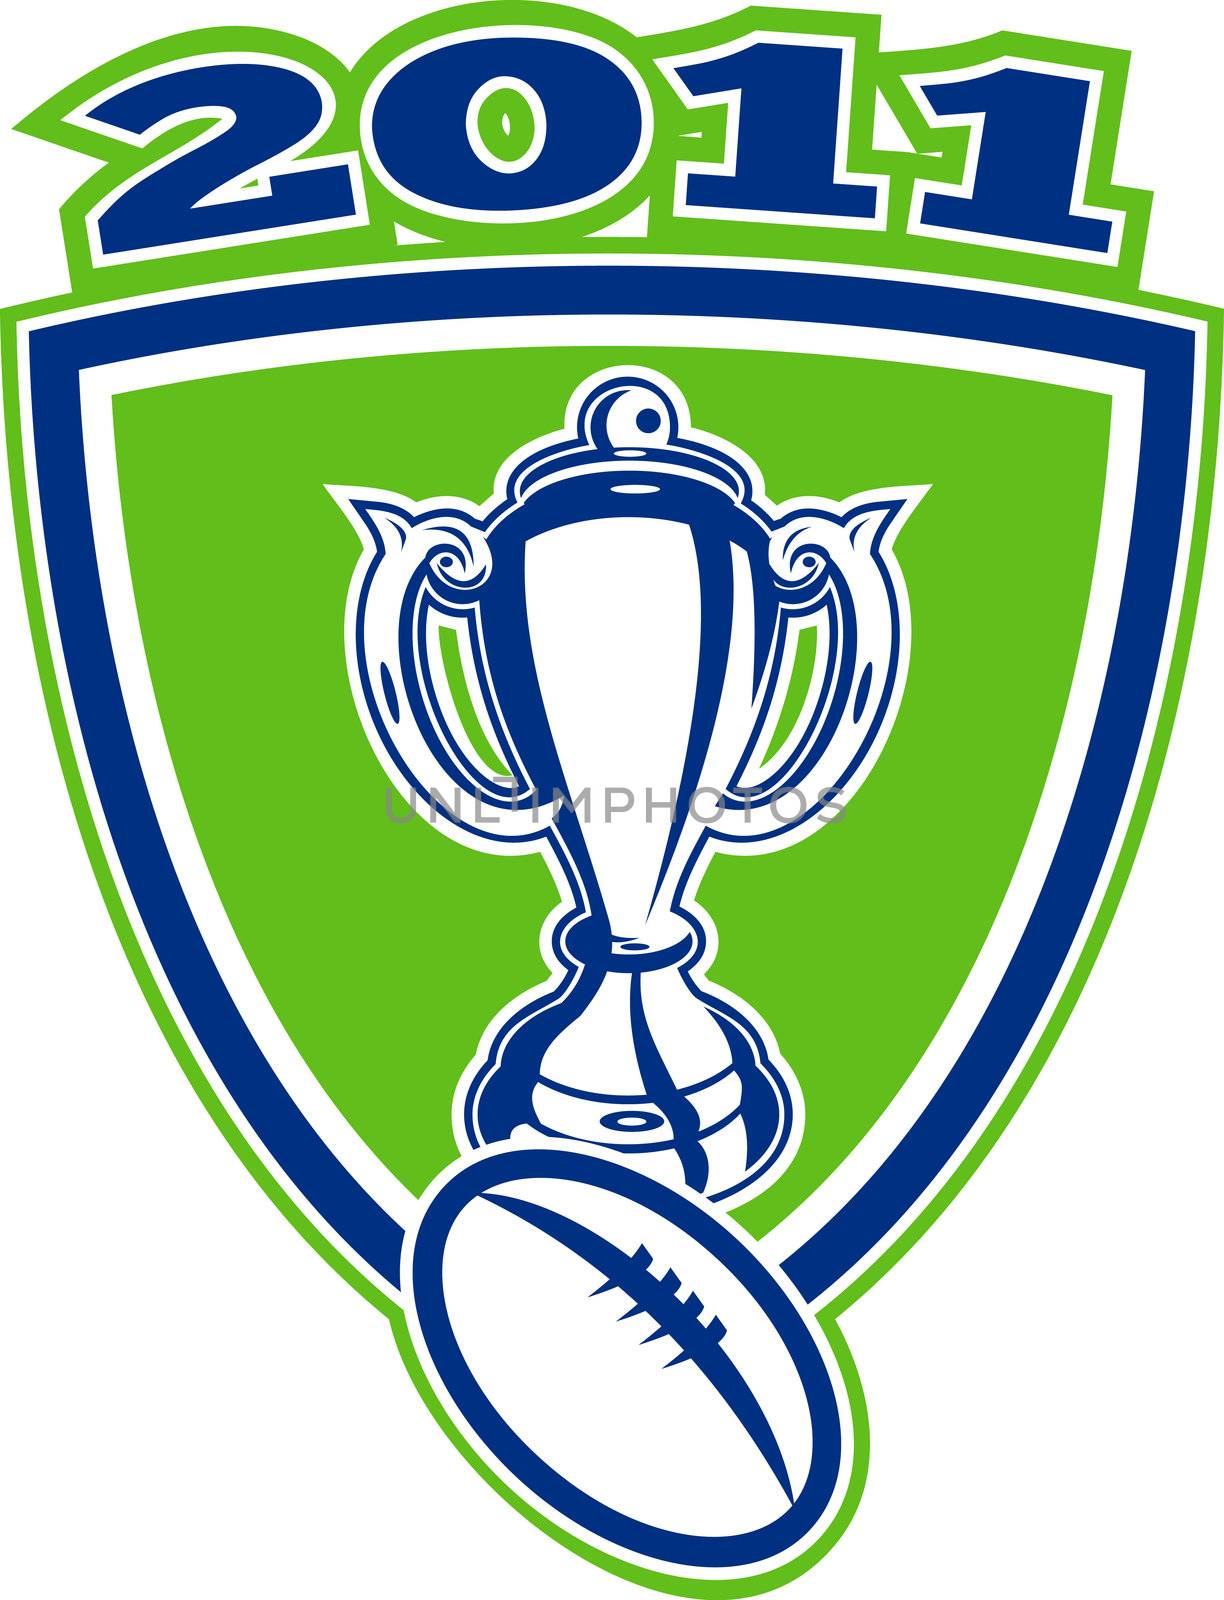 illustration of a championship world cup or trophy with rugby ball and shield and words 2011